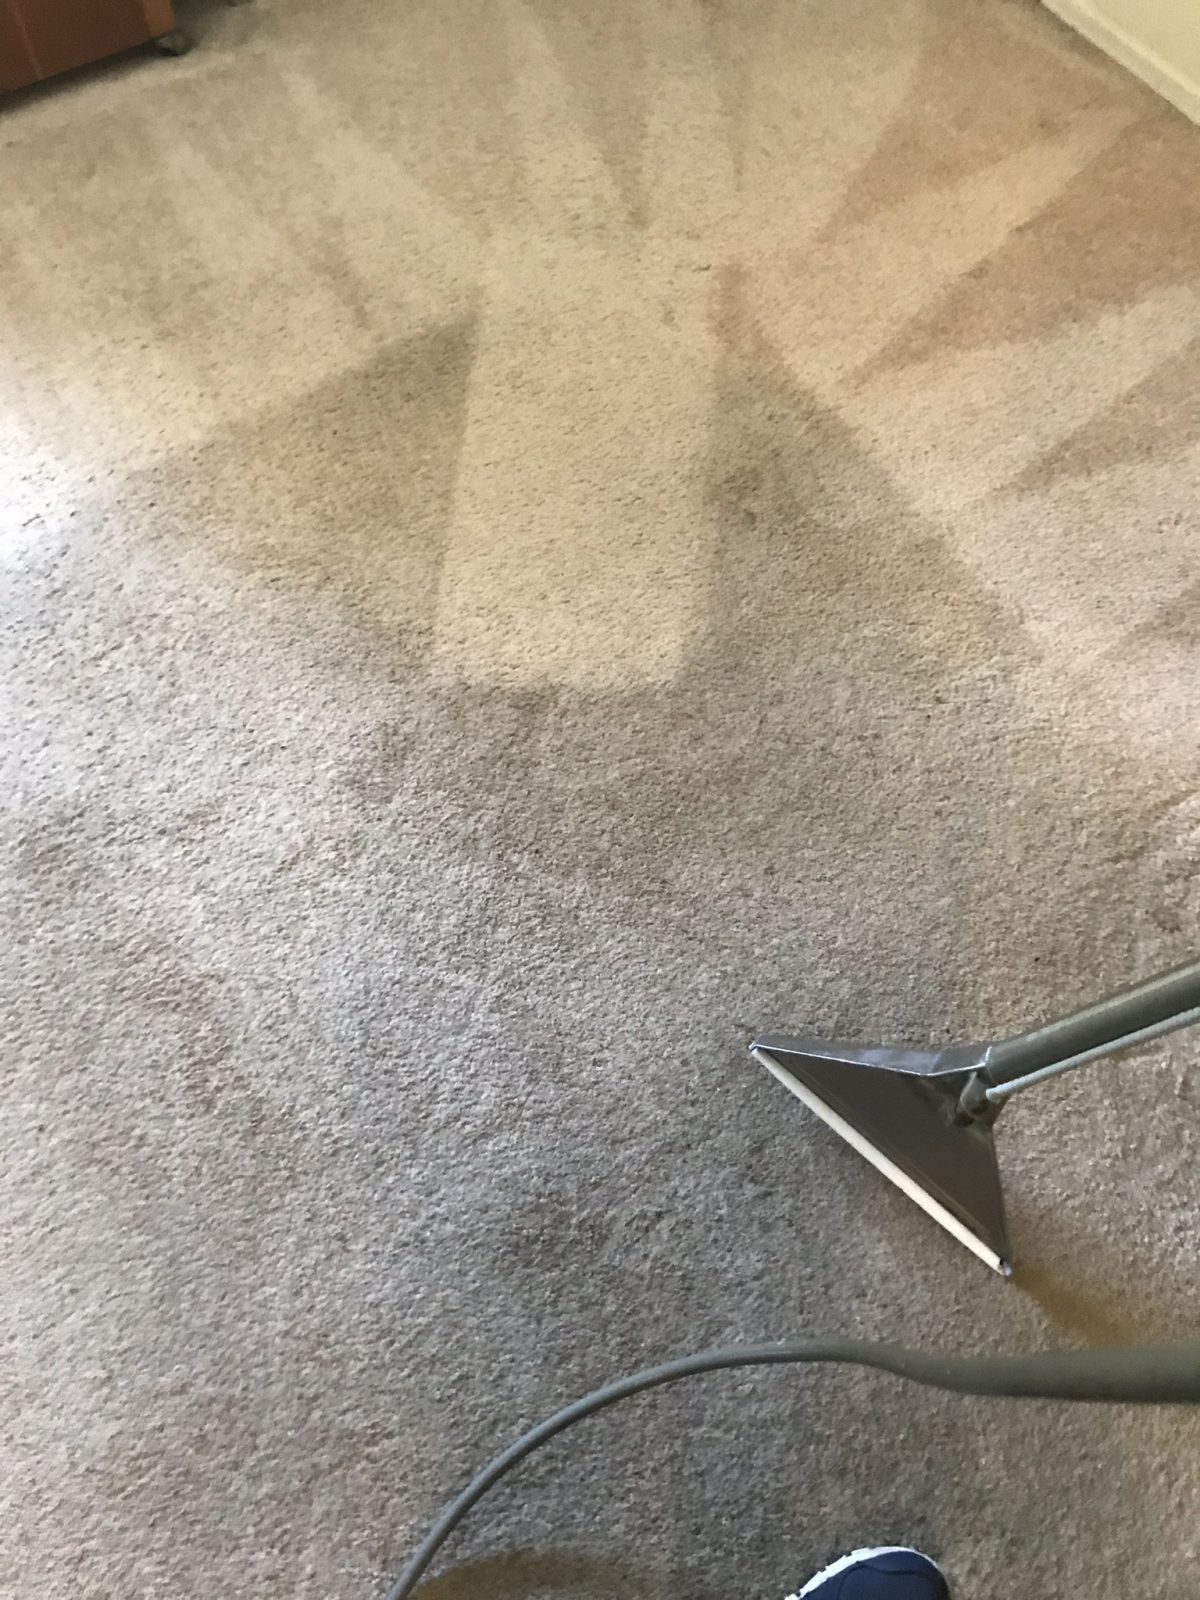 Professional Carpet Cleaning Safety Harbor Florida by Howards Cleaning Service